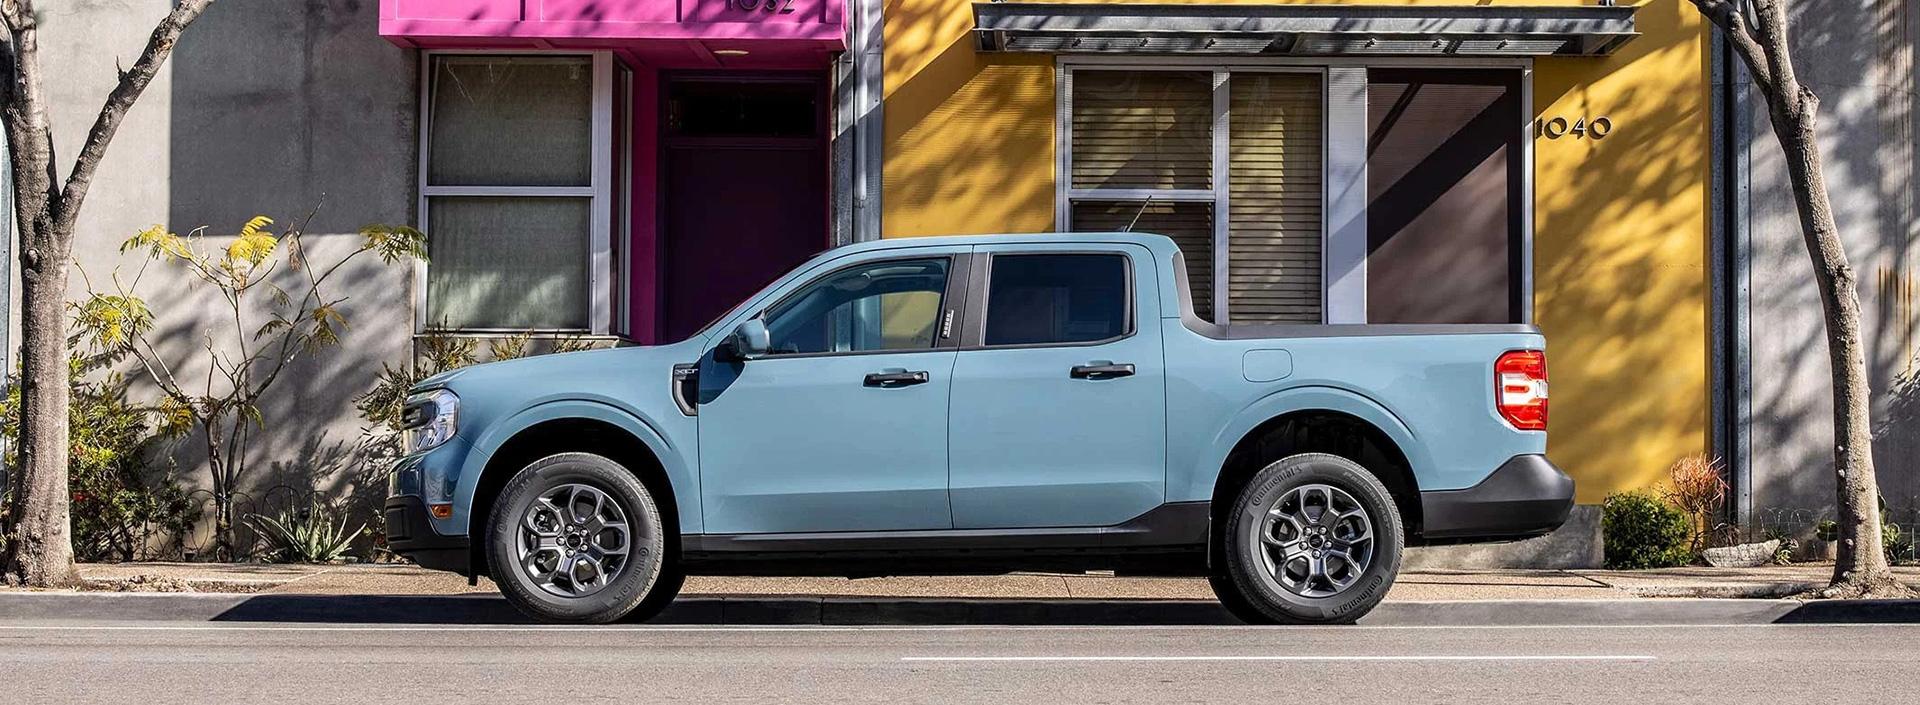 2022 Ford Maverick Truck | Southern California Ford Dealers